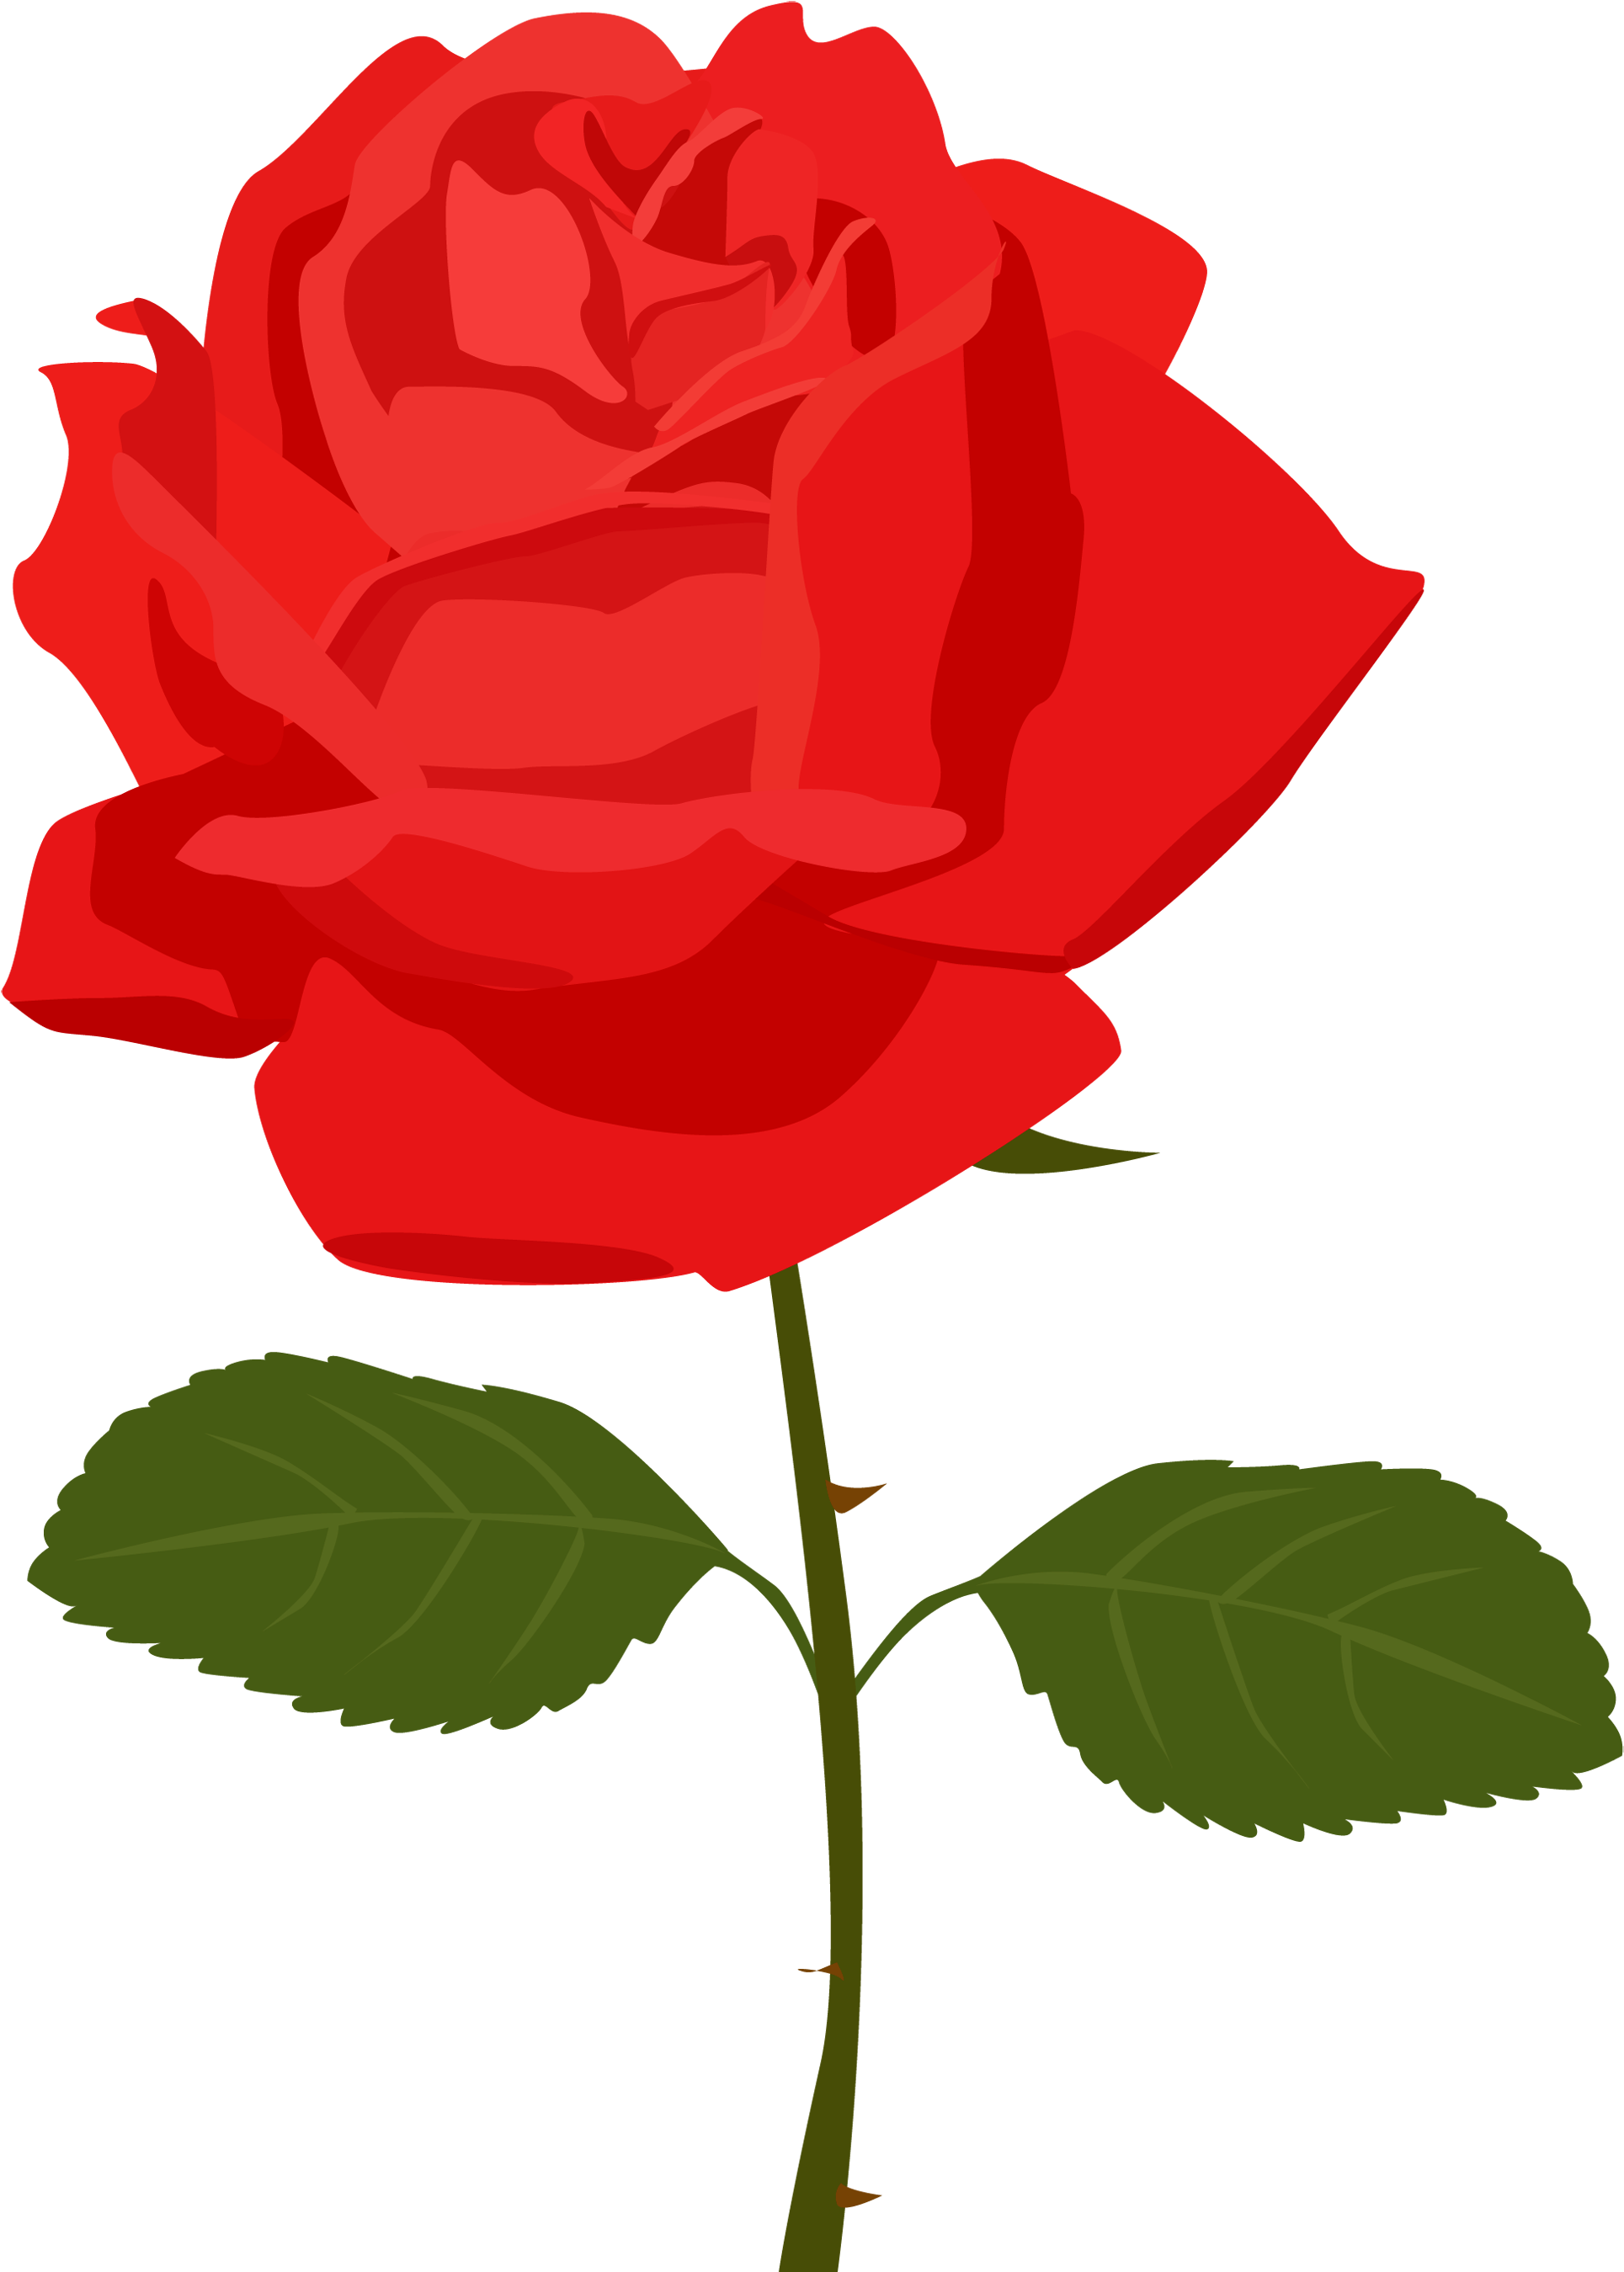 Red Rose Clip Art Free - Rose Clipart Transparent Background (1950x2707)